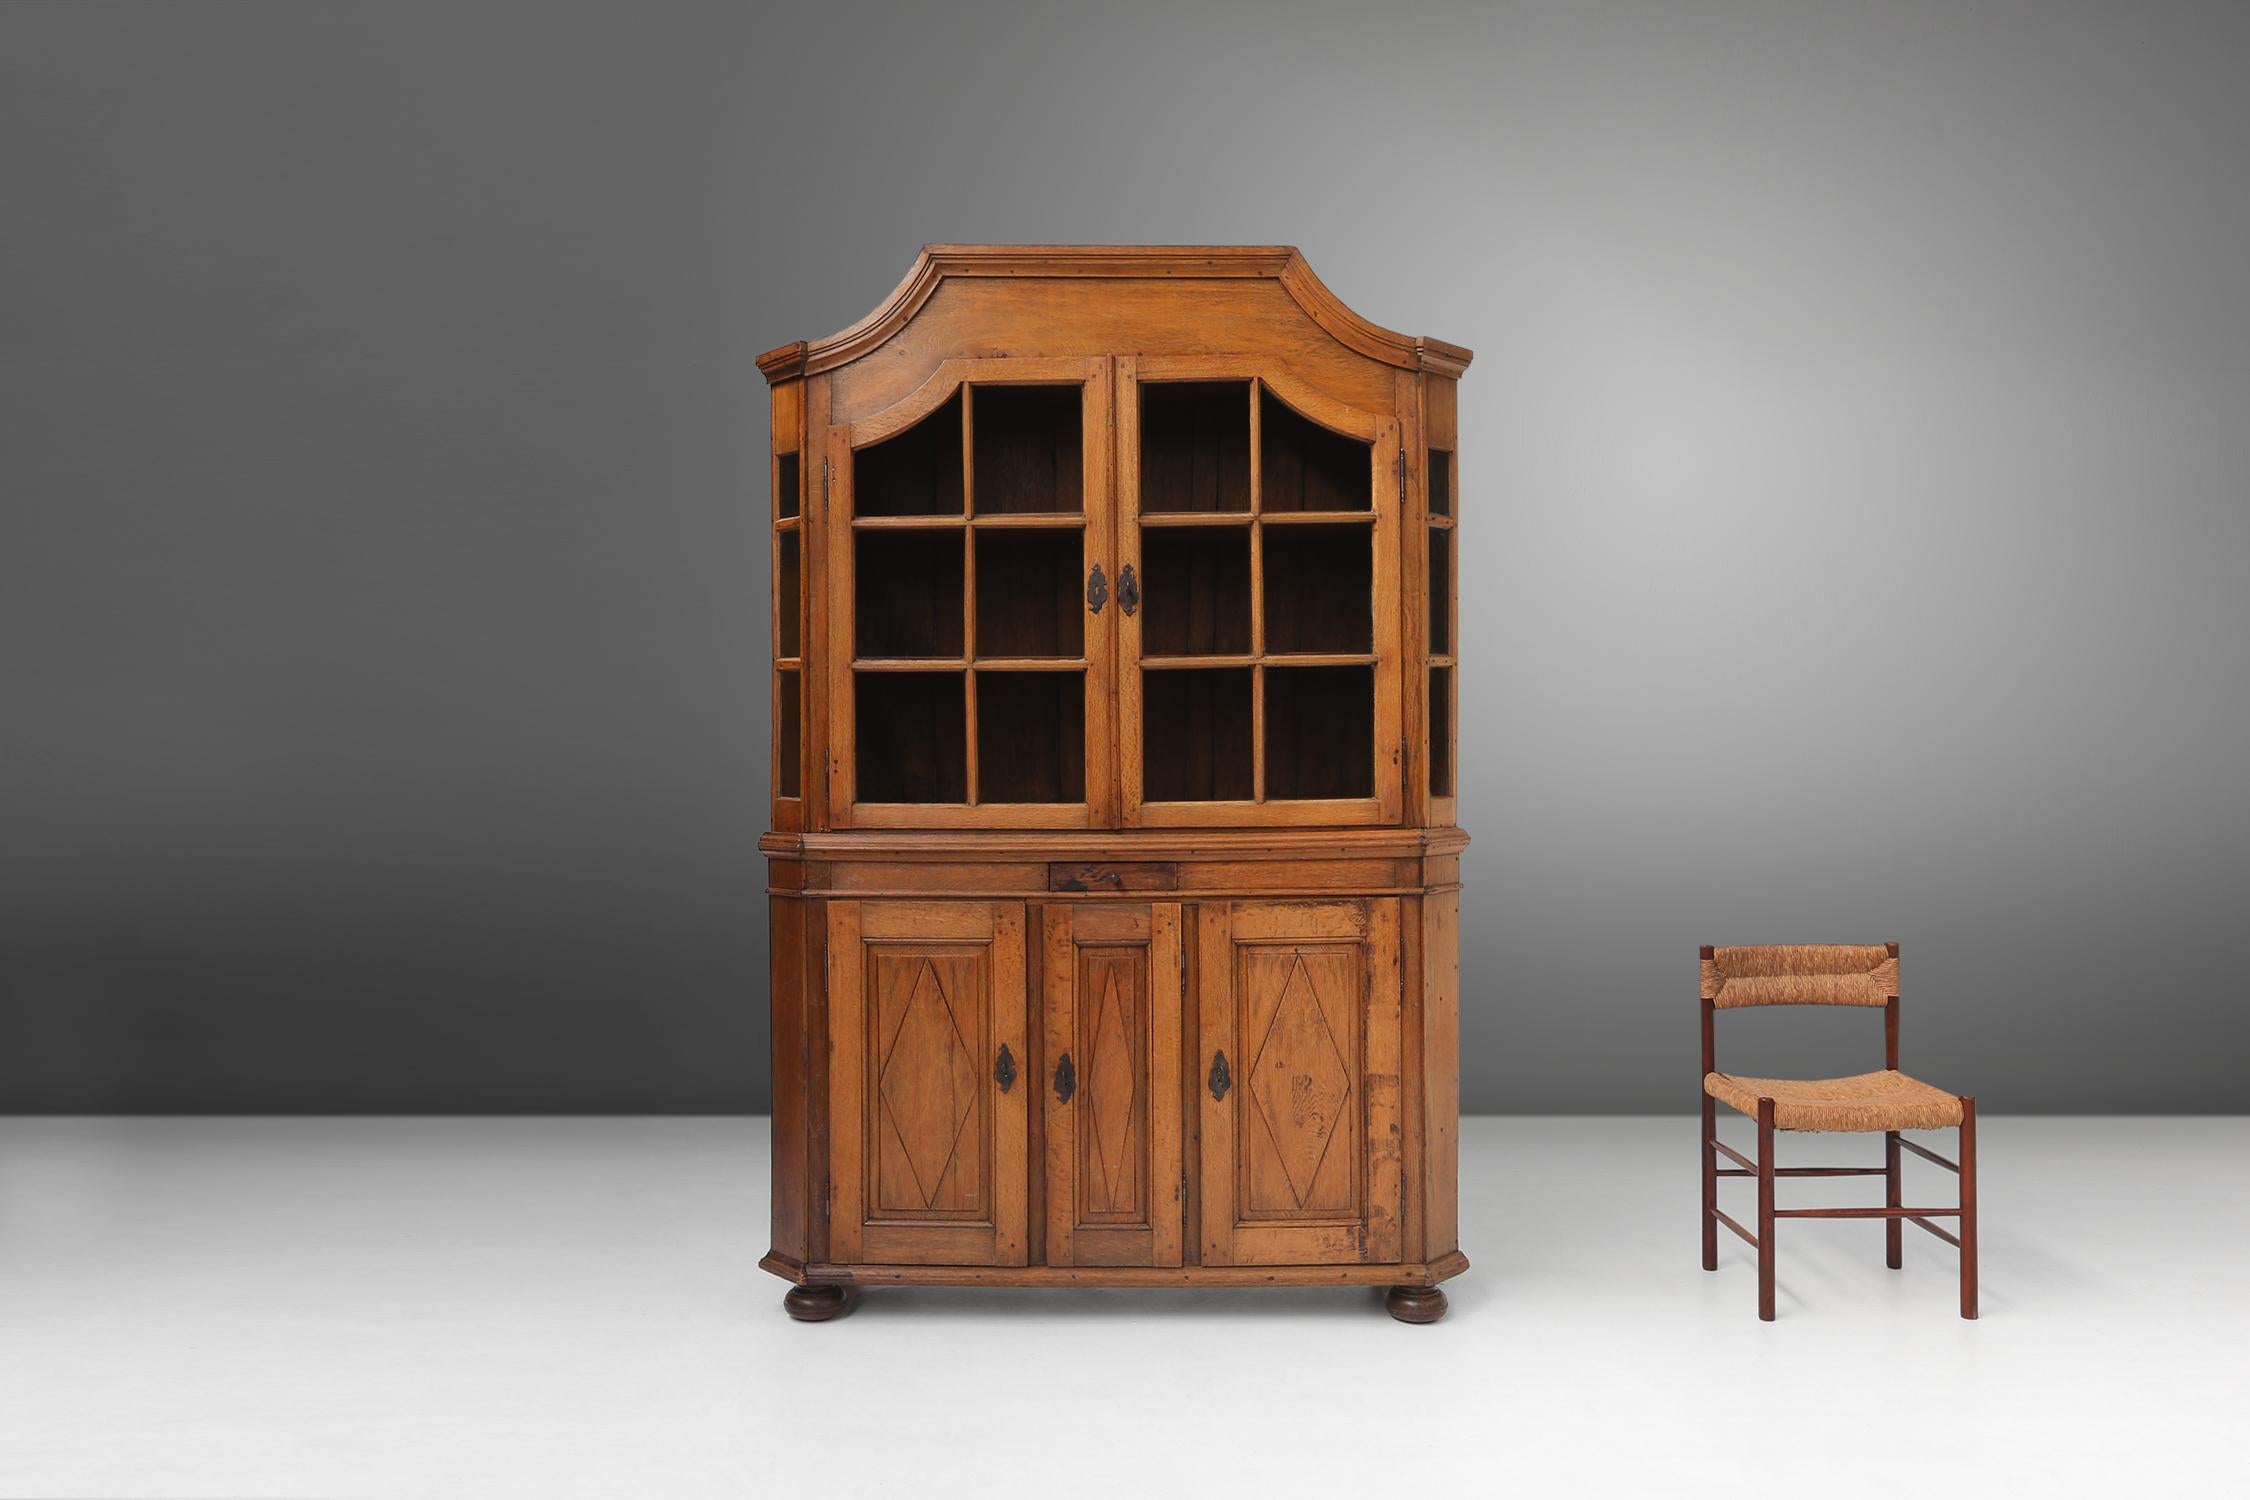 Authentic 18th-century German display cabinet, a masterpiece of craftsmanship and design. Made of solid oak, this cabinet has a rich history and beauty. You can see the authenticity by the original blown glass, which is a rare and precious feature.